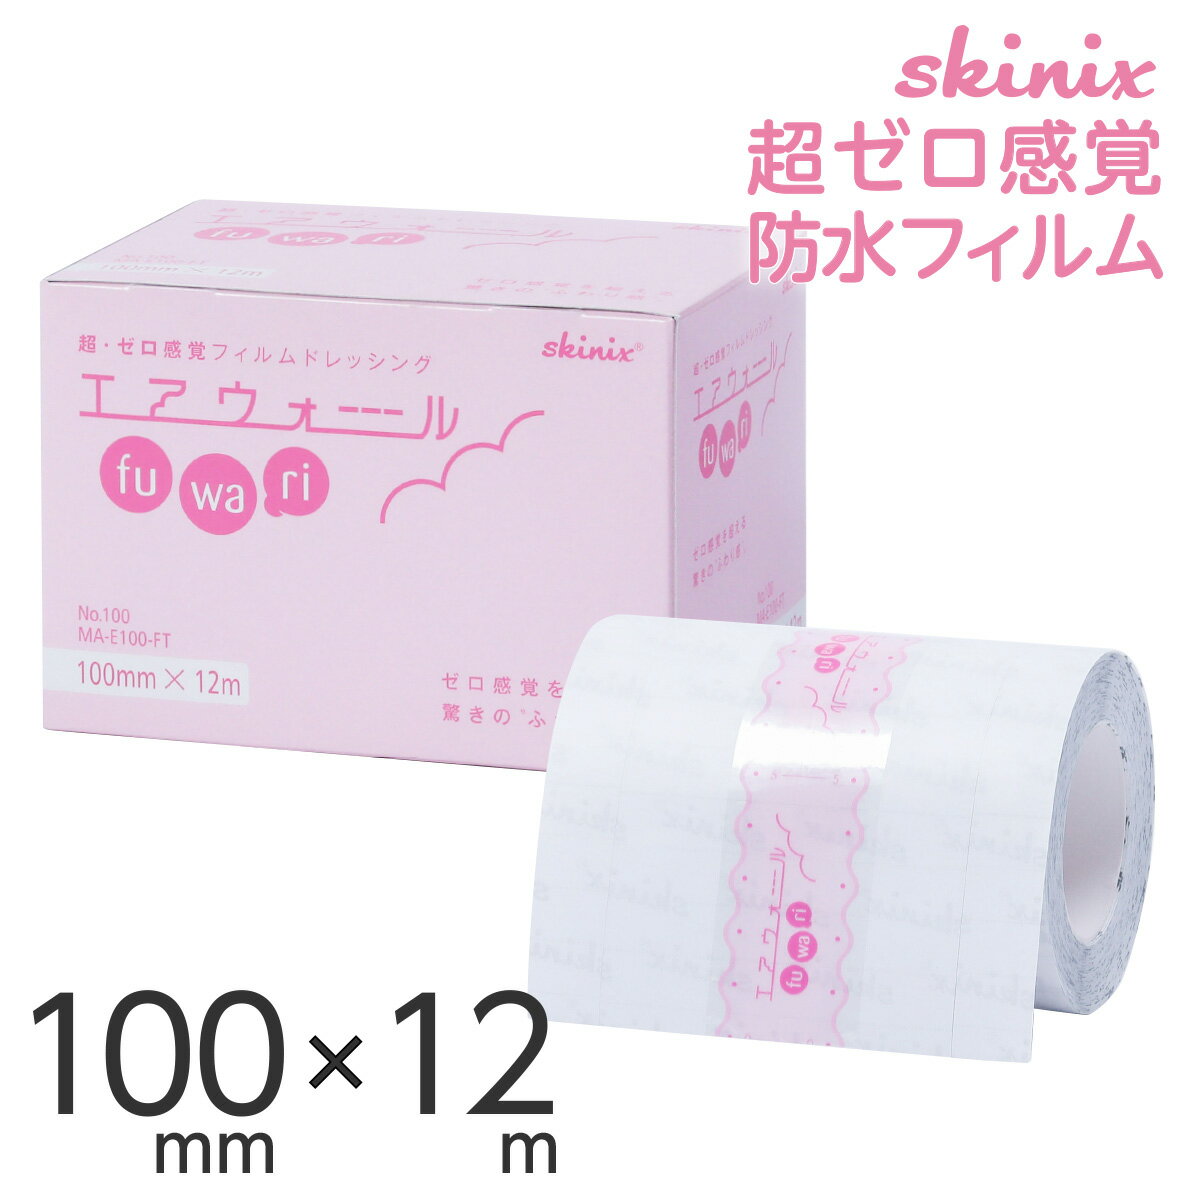 skinix <strong>エア</strong><strong>ウォール</strong>ふわり <strong>100mm</strong>×12m 超ゼロ感覚 フィルムドレッシング 防水フィルムロール 肌に優しい 透明 1巻 MA-E100-FT【返品不可】